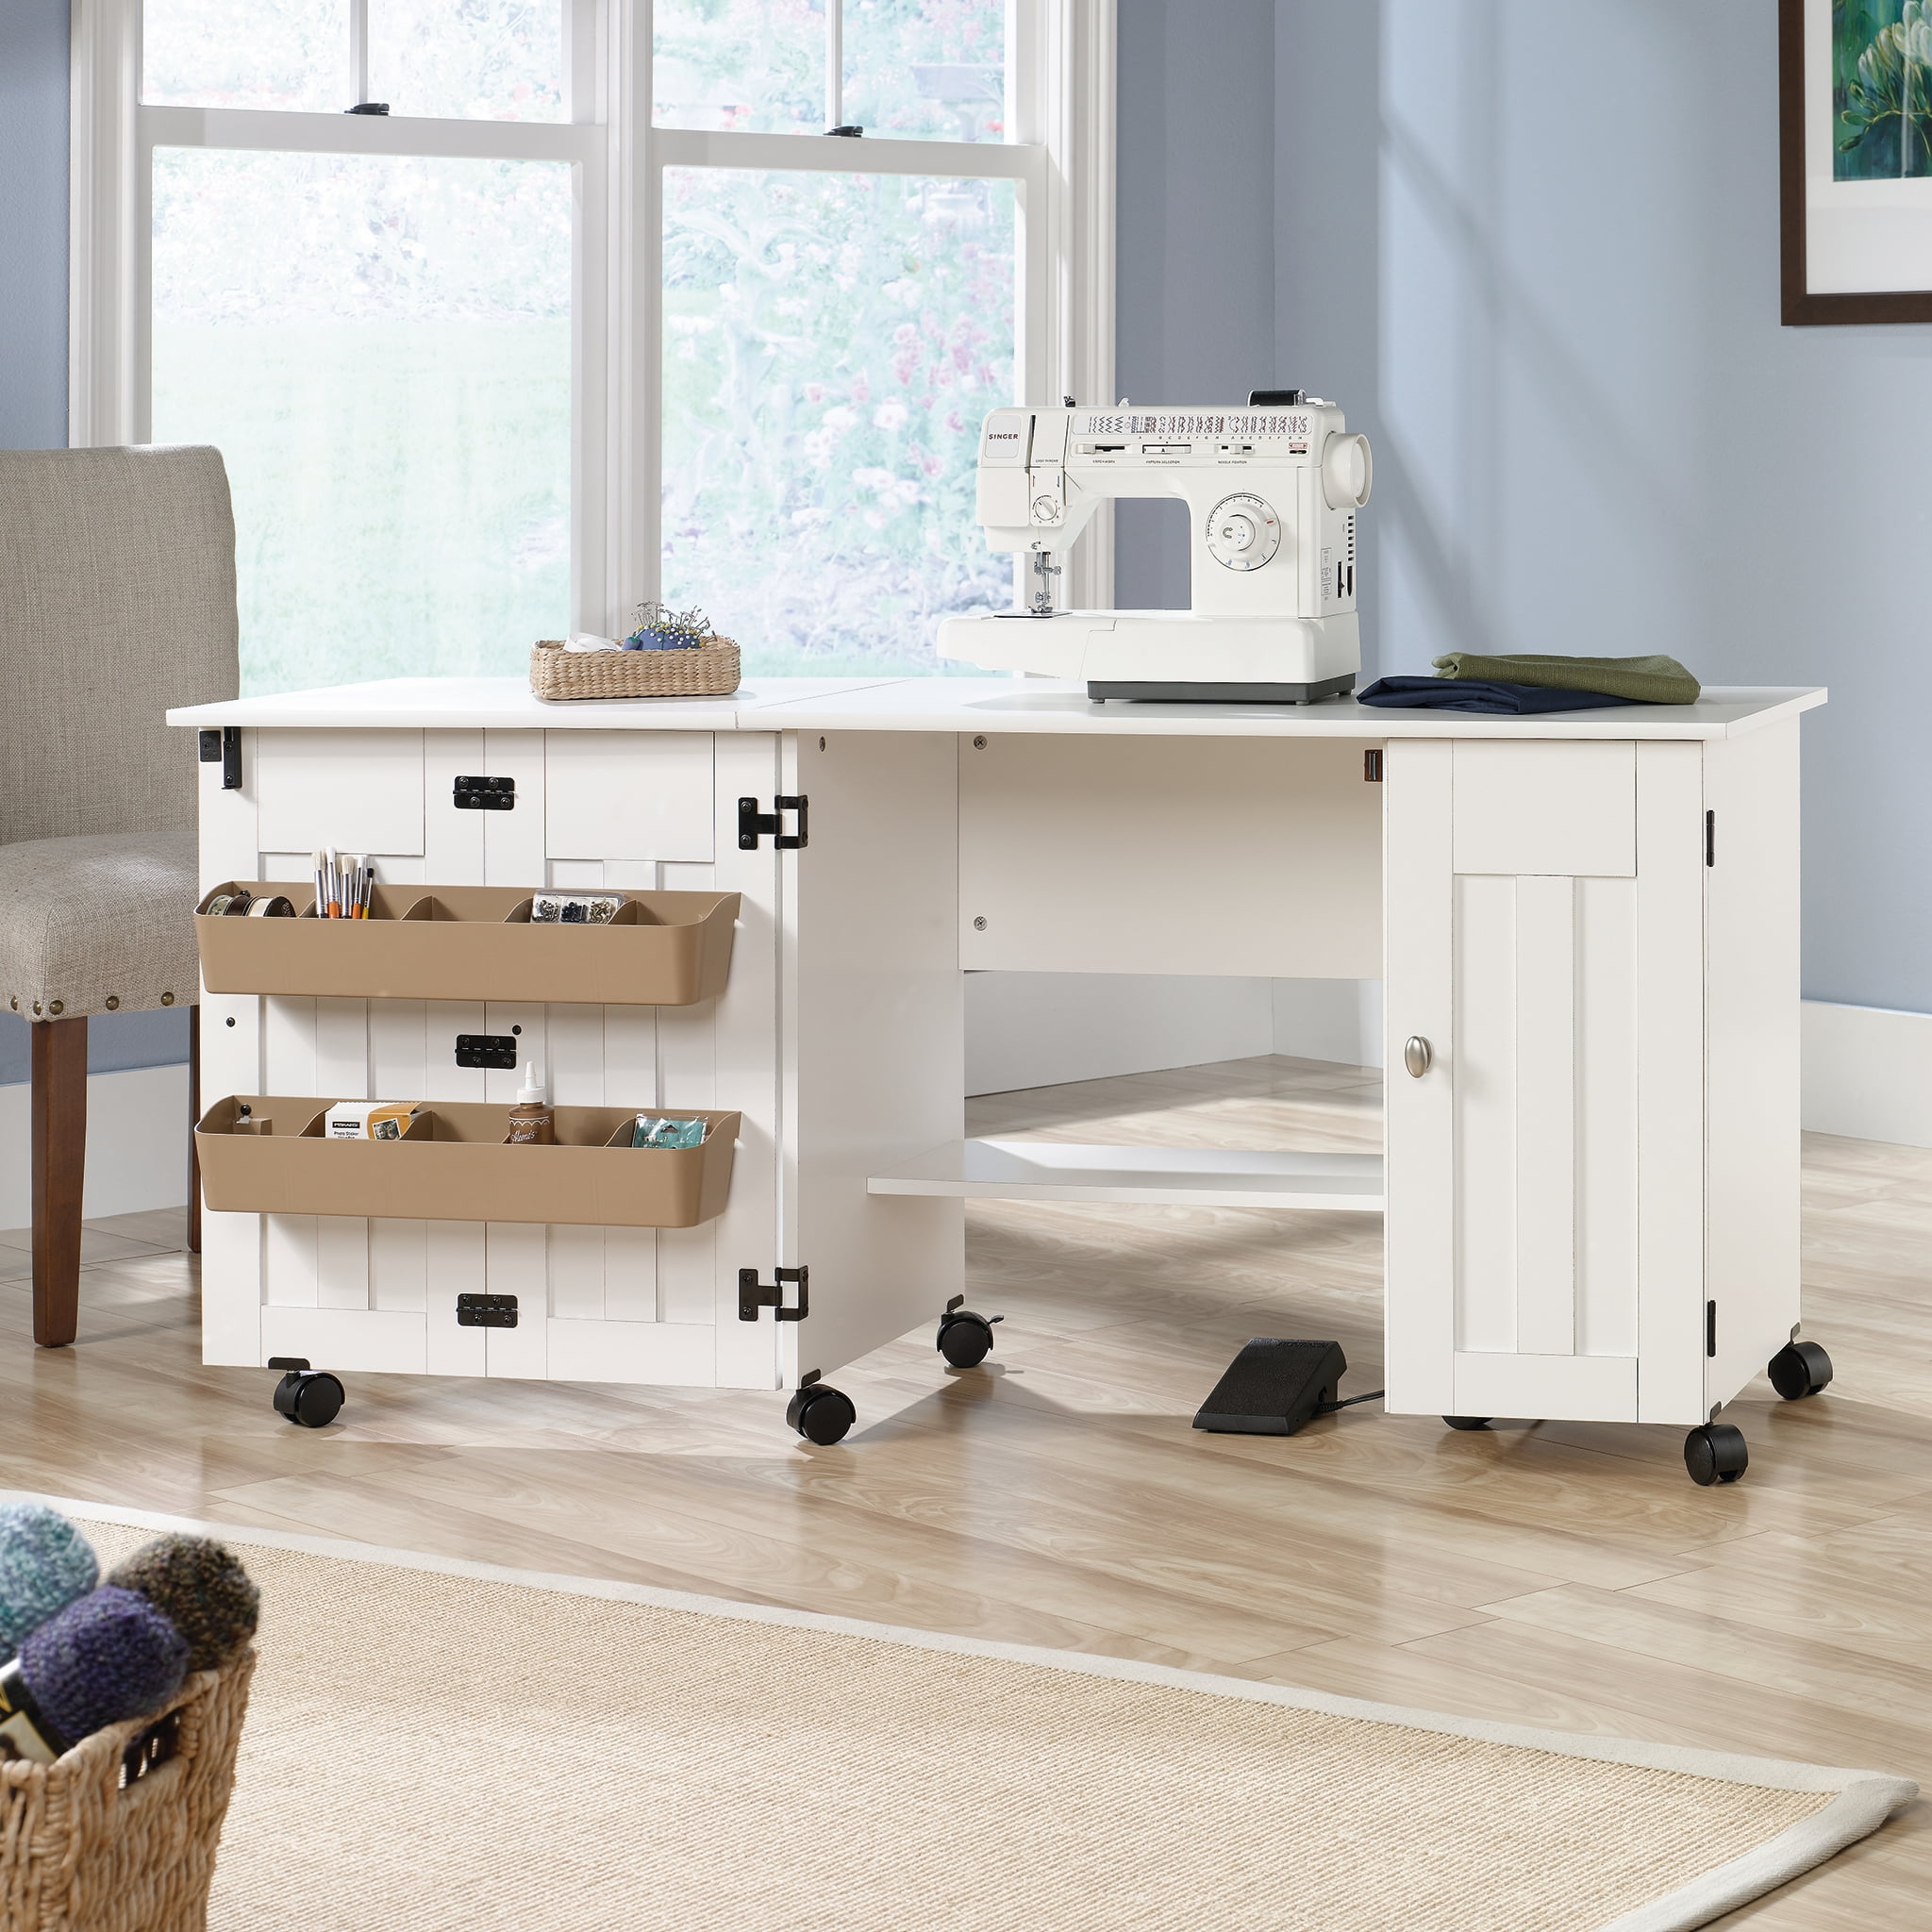 Sewing Craft Table Workstation With Storage Doors Shelves Space Saving Cabinet 